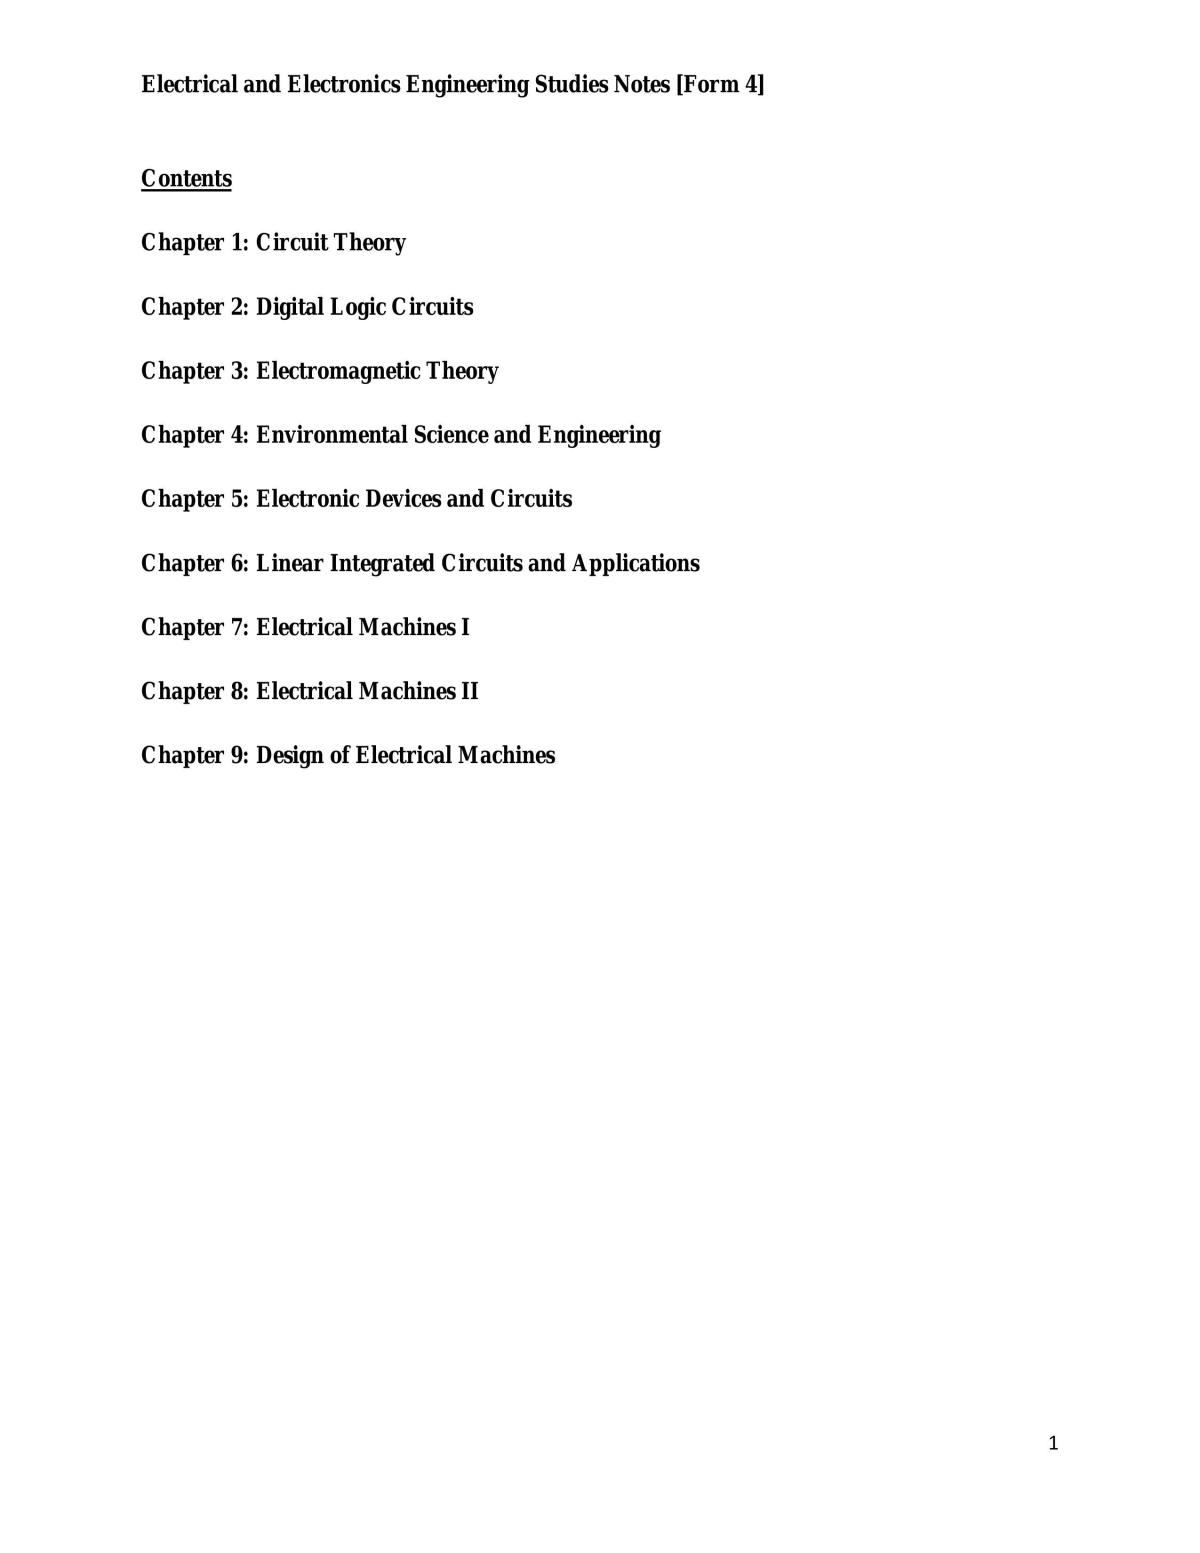 Electrical and Electronic Engineering Studies Form 4 - Page 1